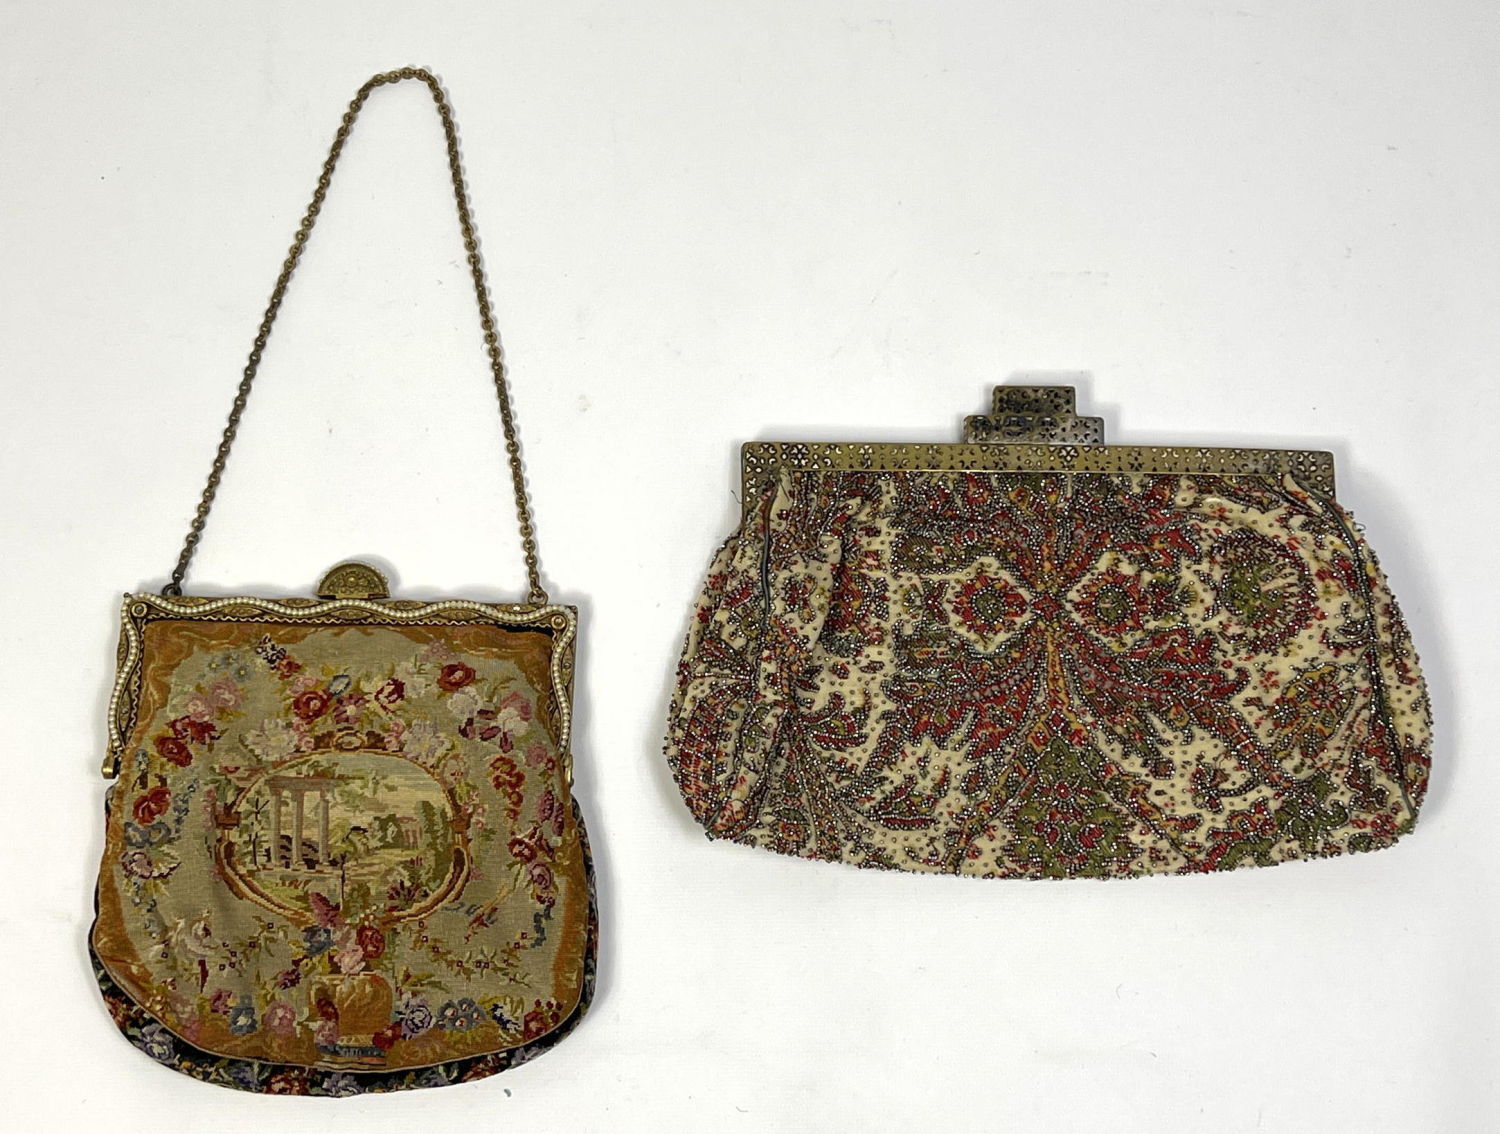 2 early antique purses, one petit